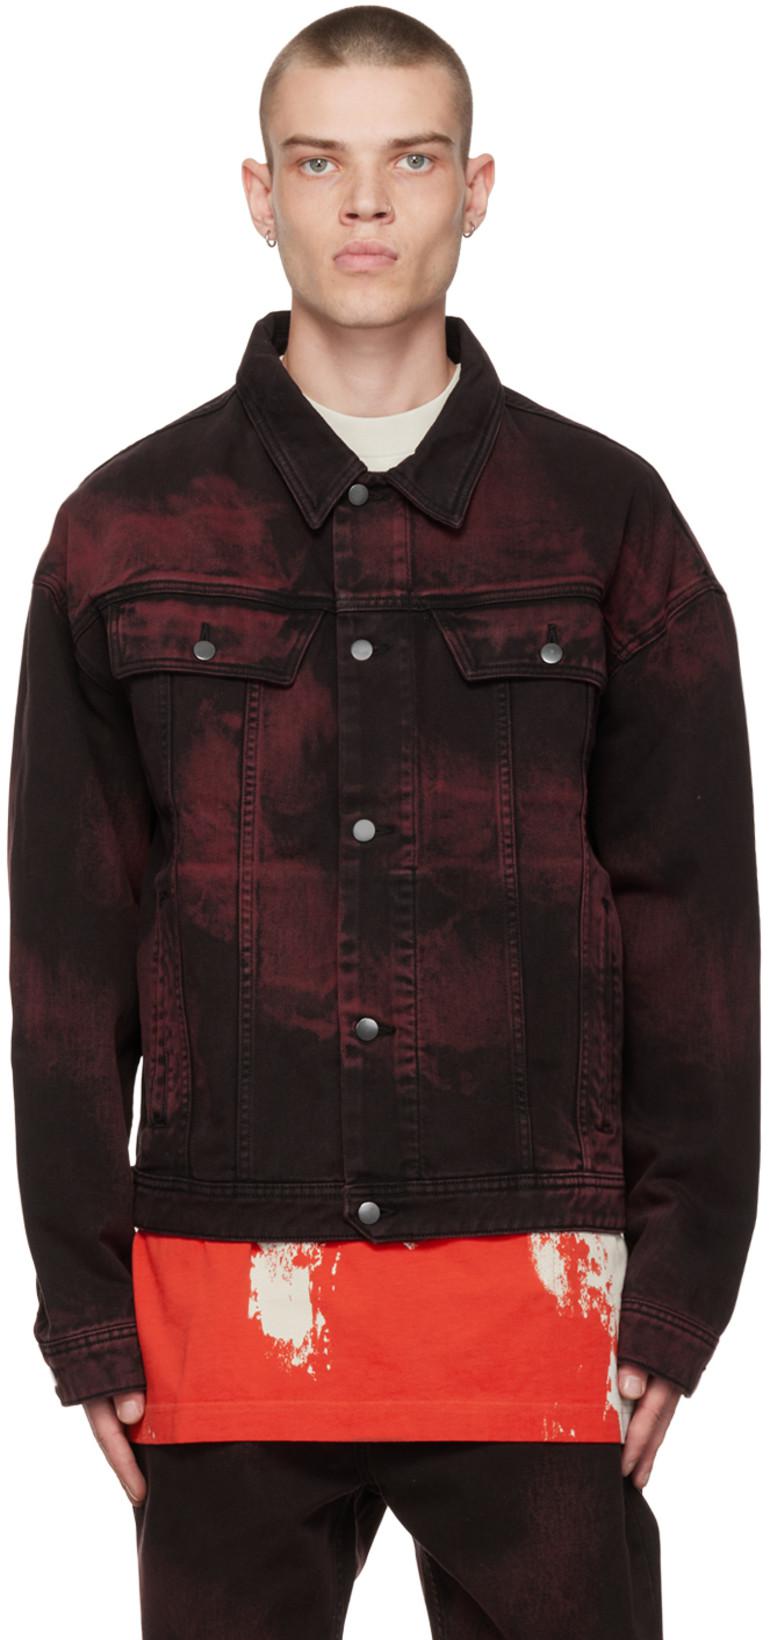 Black & Red Button Up Denim Jacket by A-COLD-WALL*